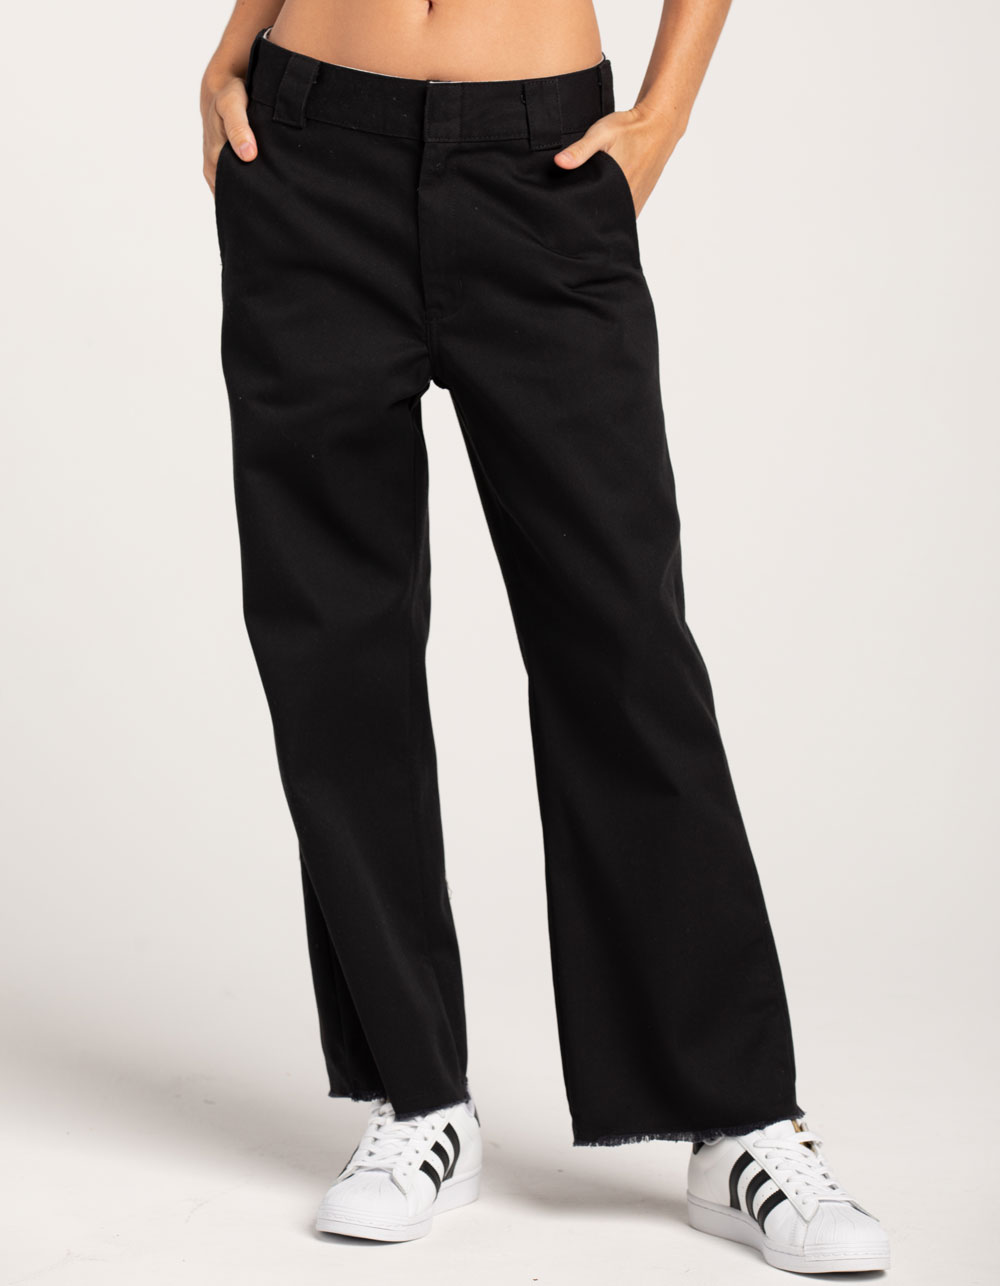 Wednesday's Workwear Report: Endless Pant 